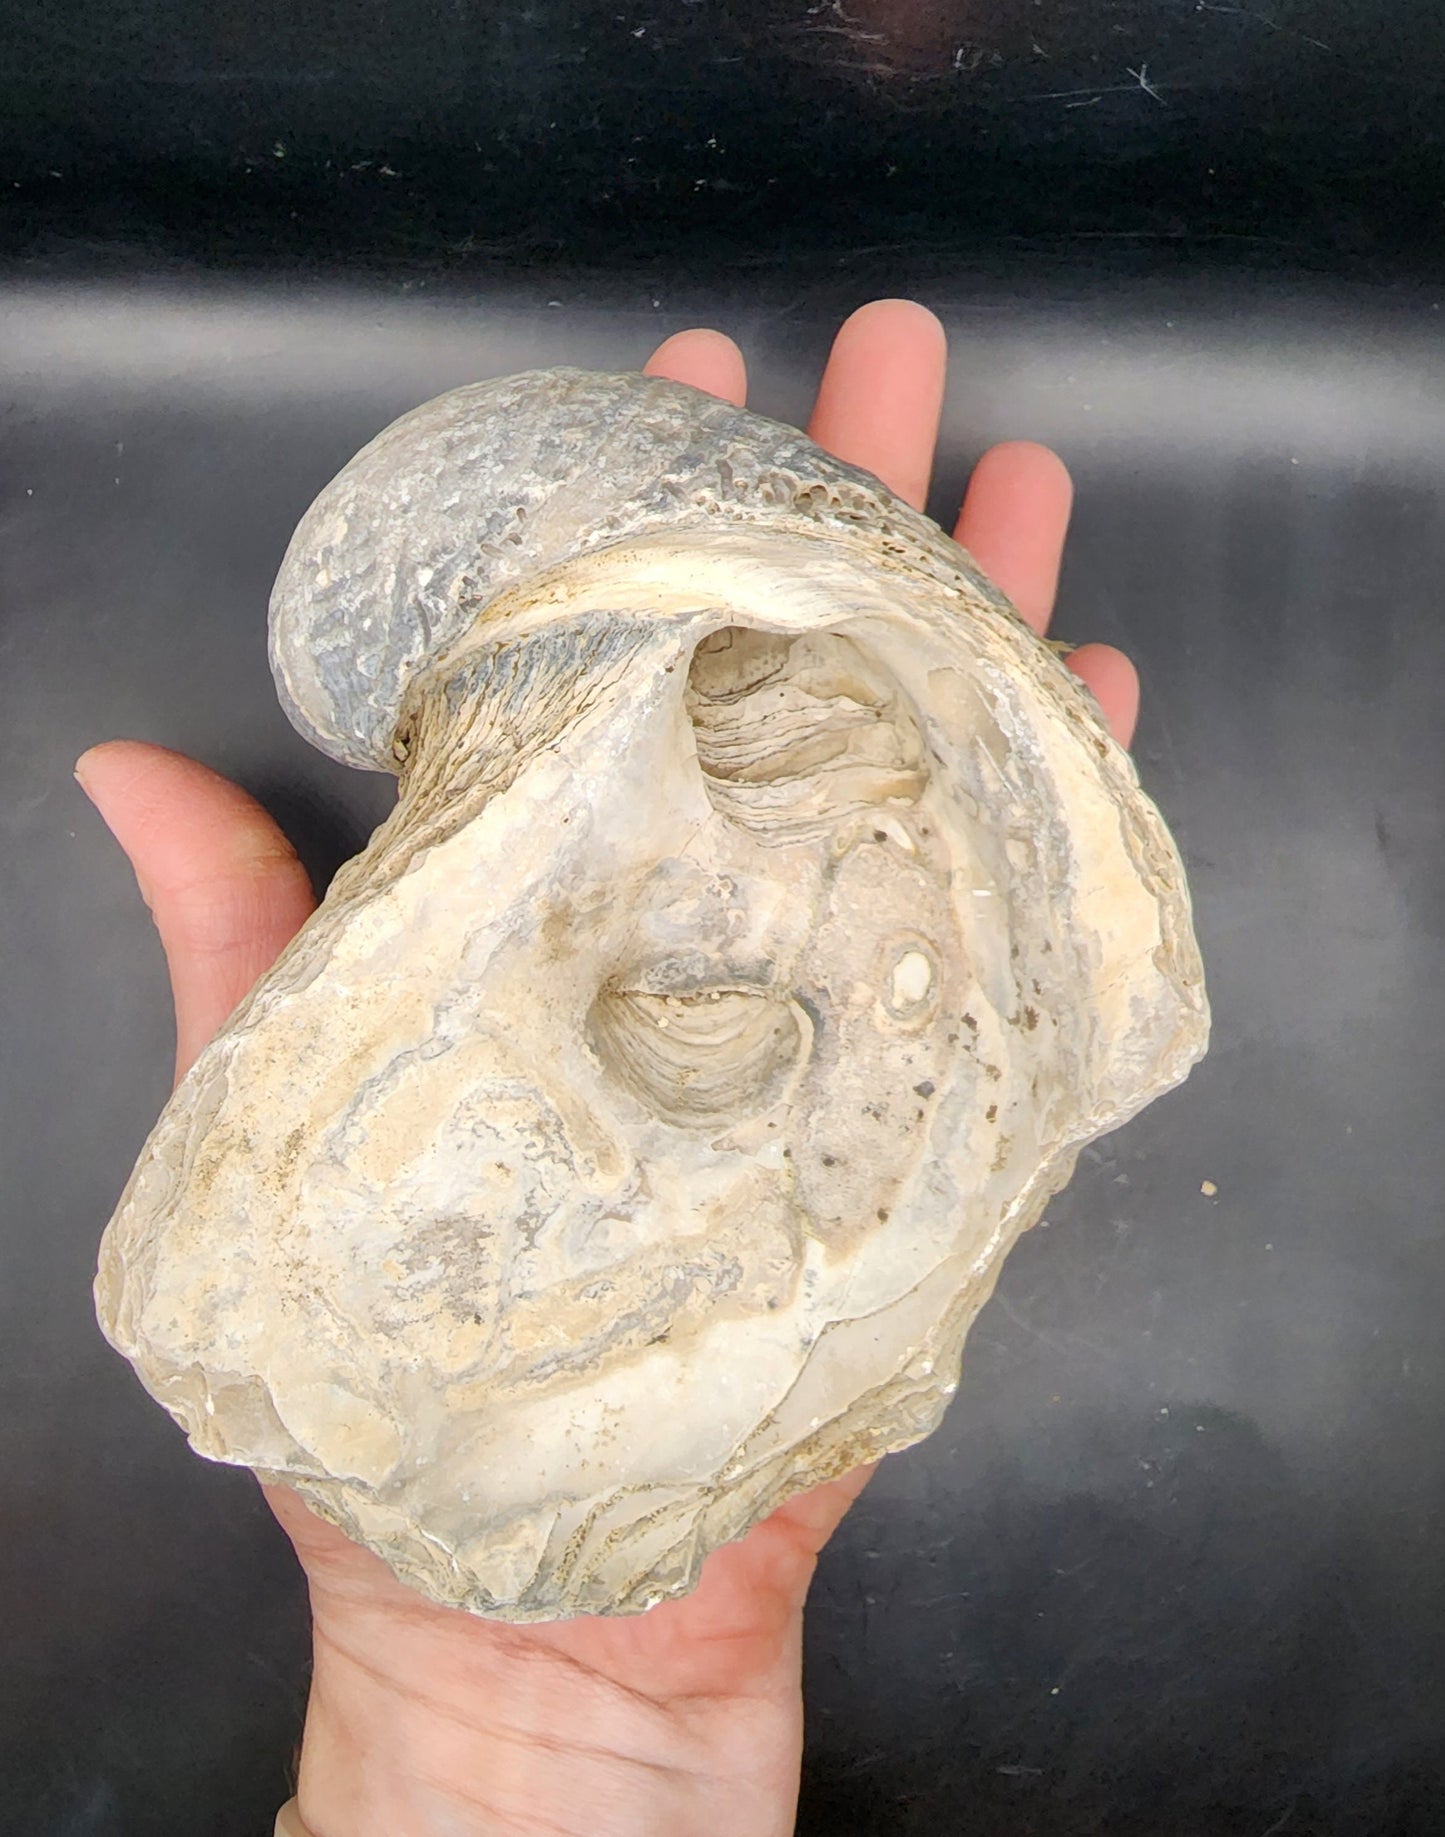 Fossilized Oyster